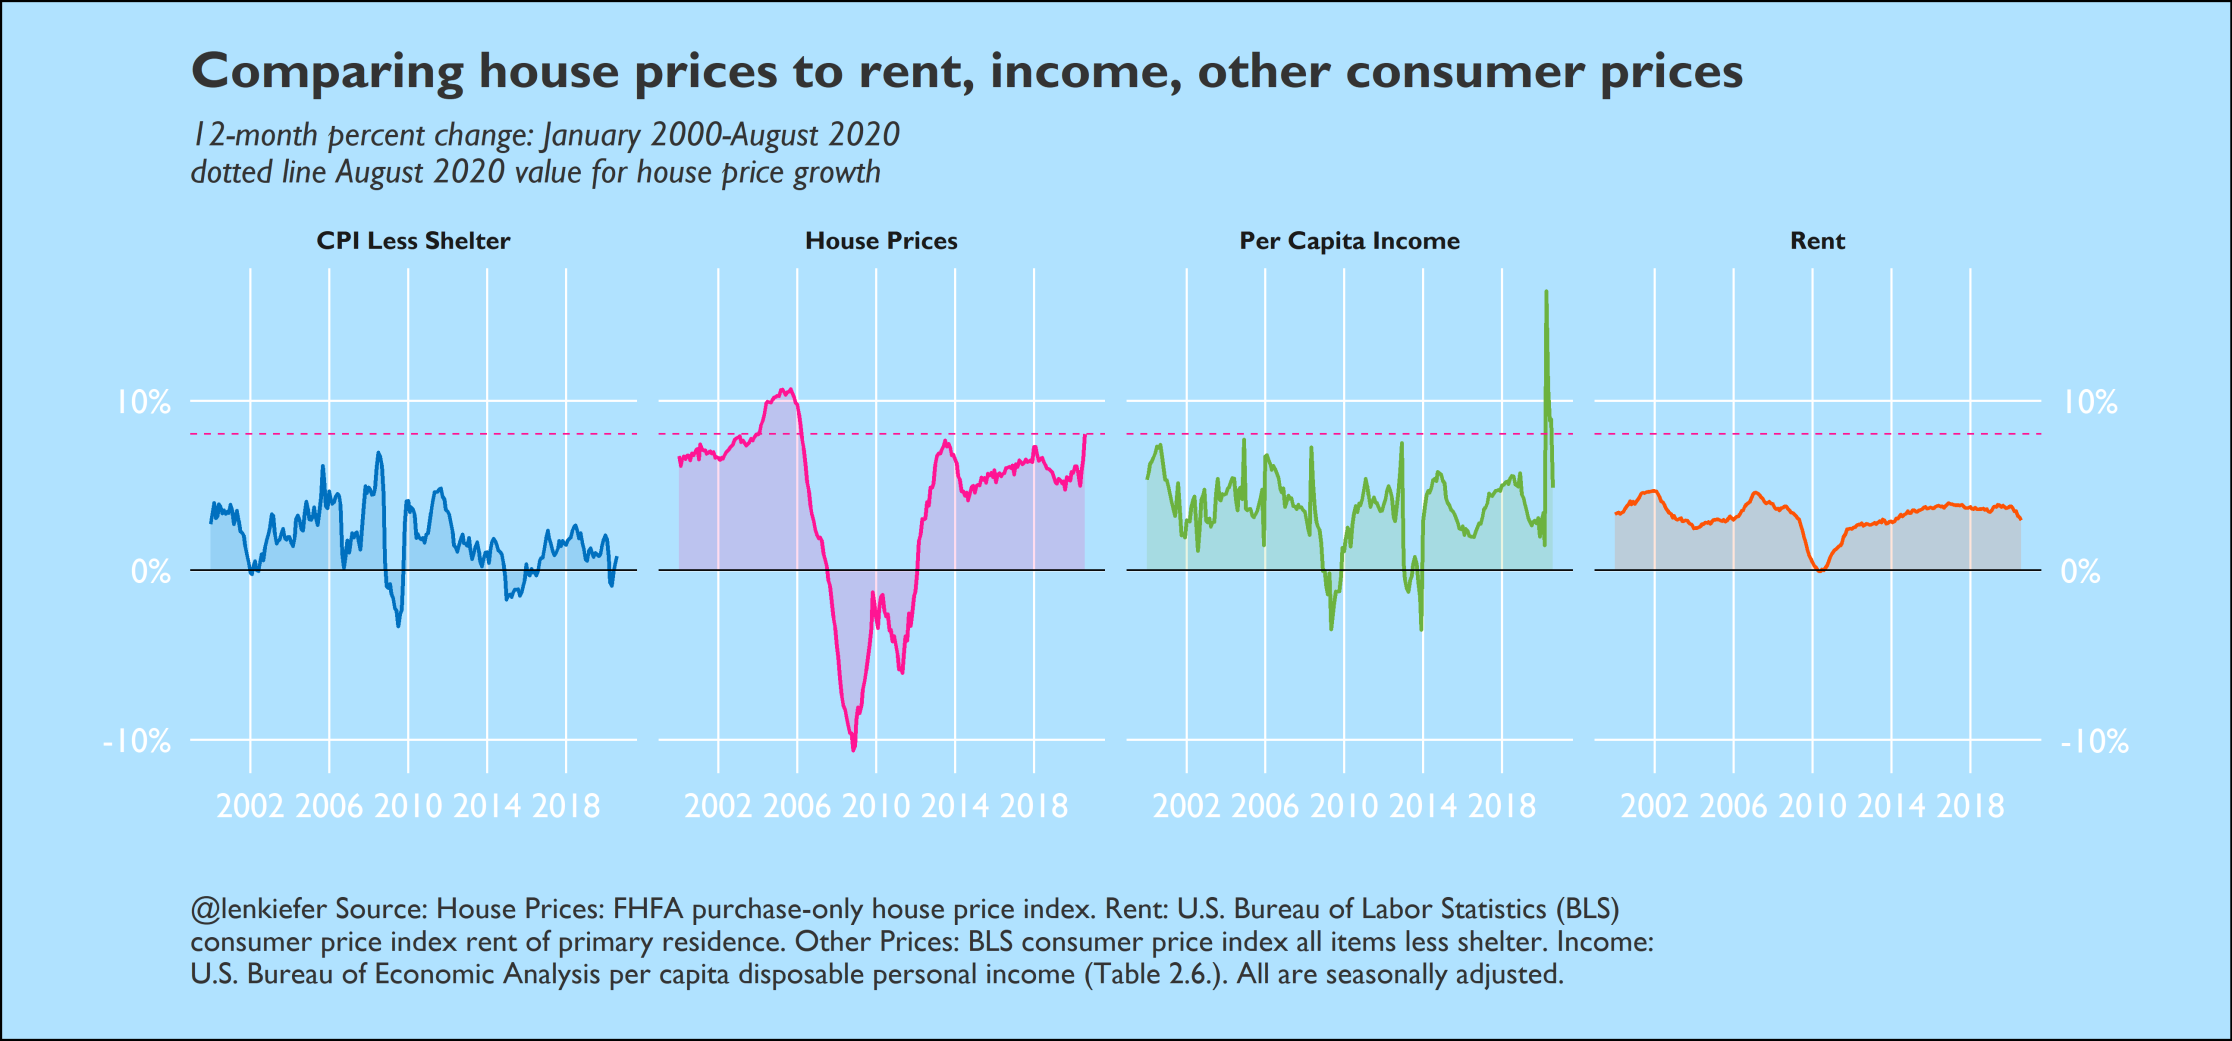 Time series chart comparing house prices to rent, income and cpi less shelter (y/y % change)